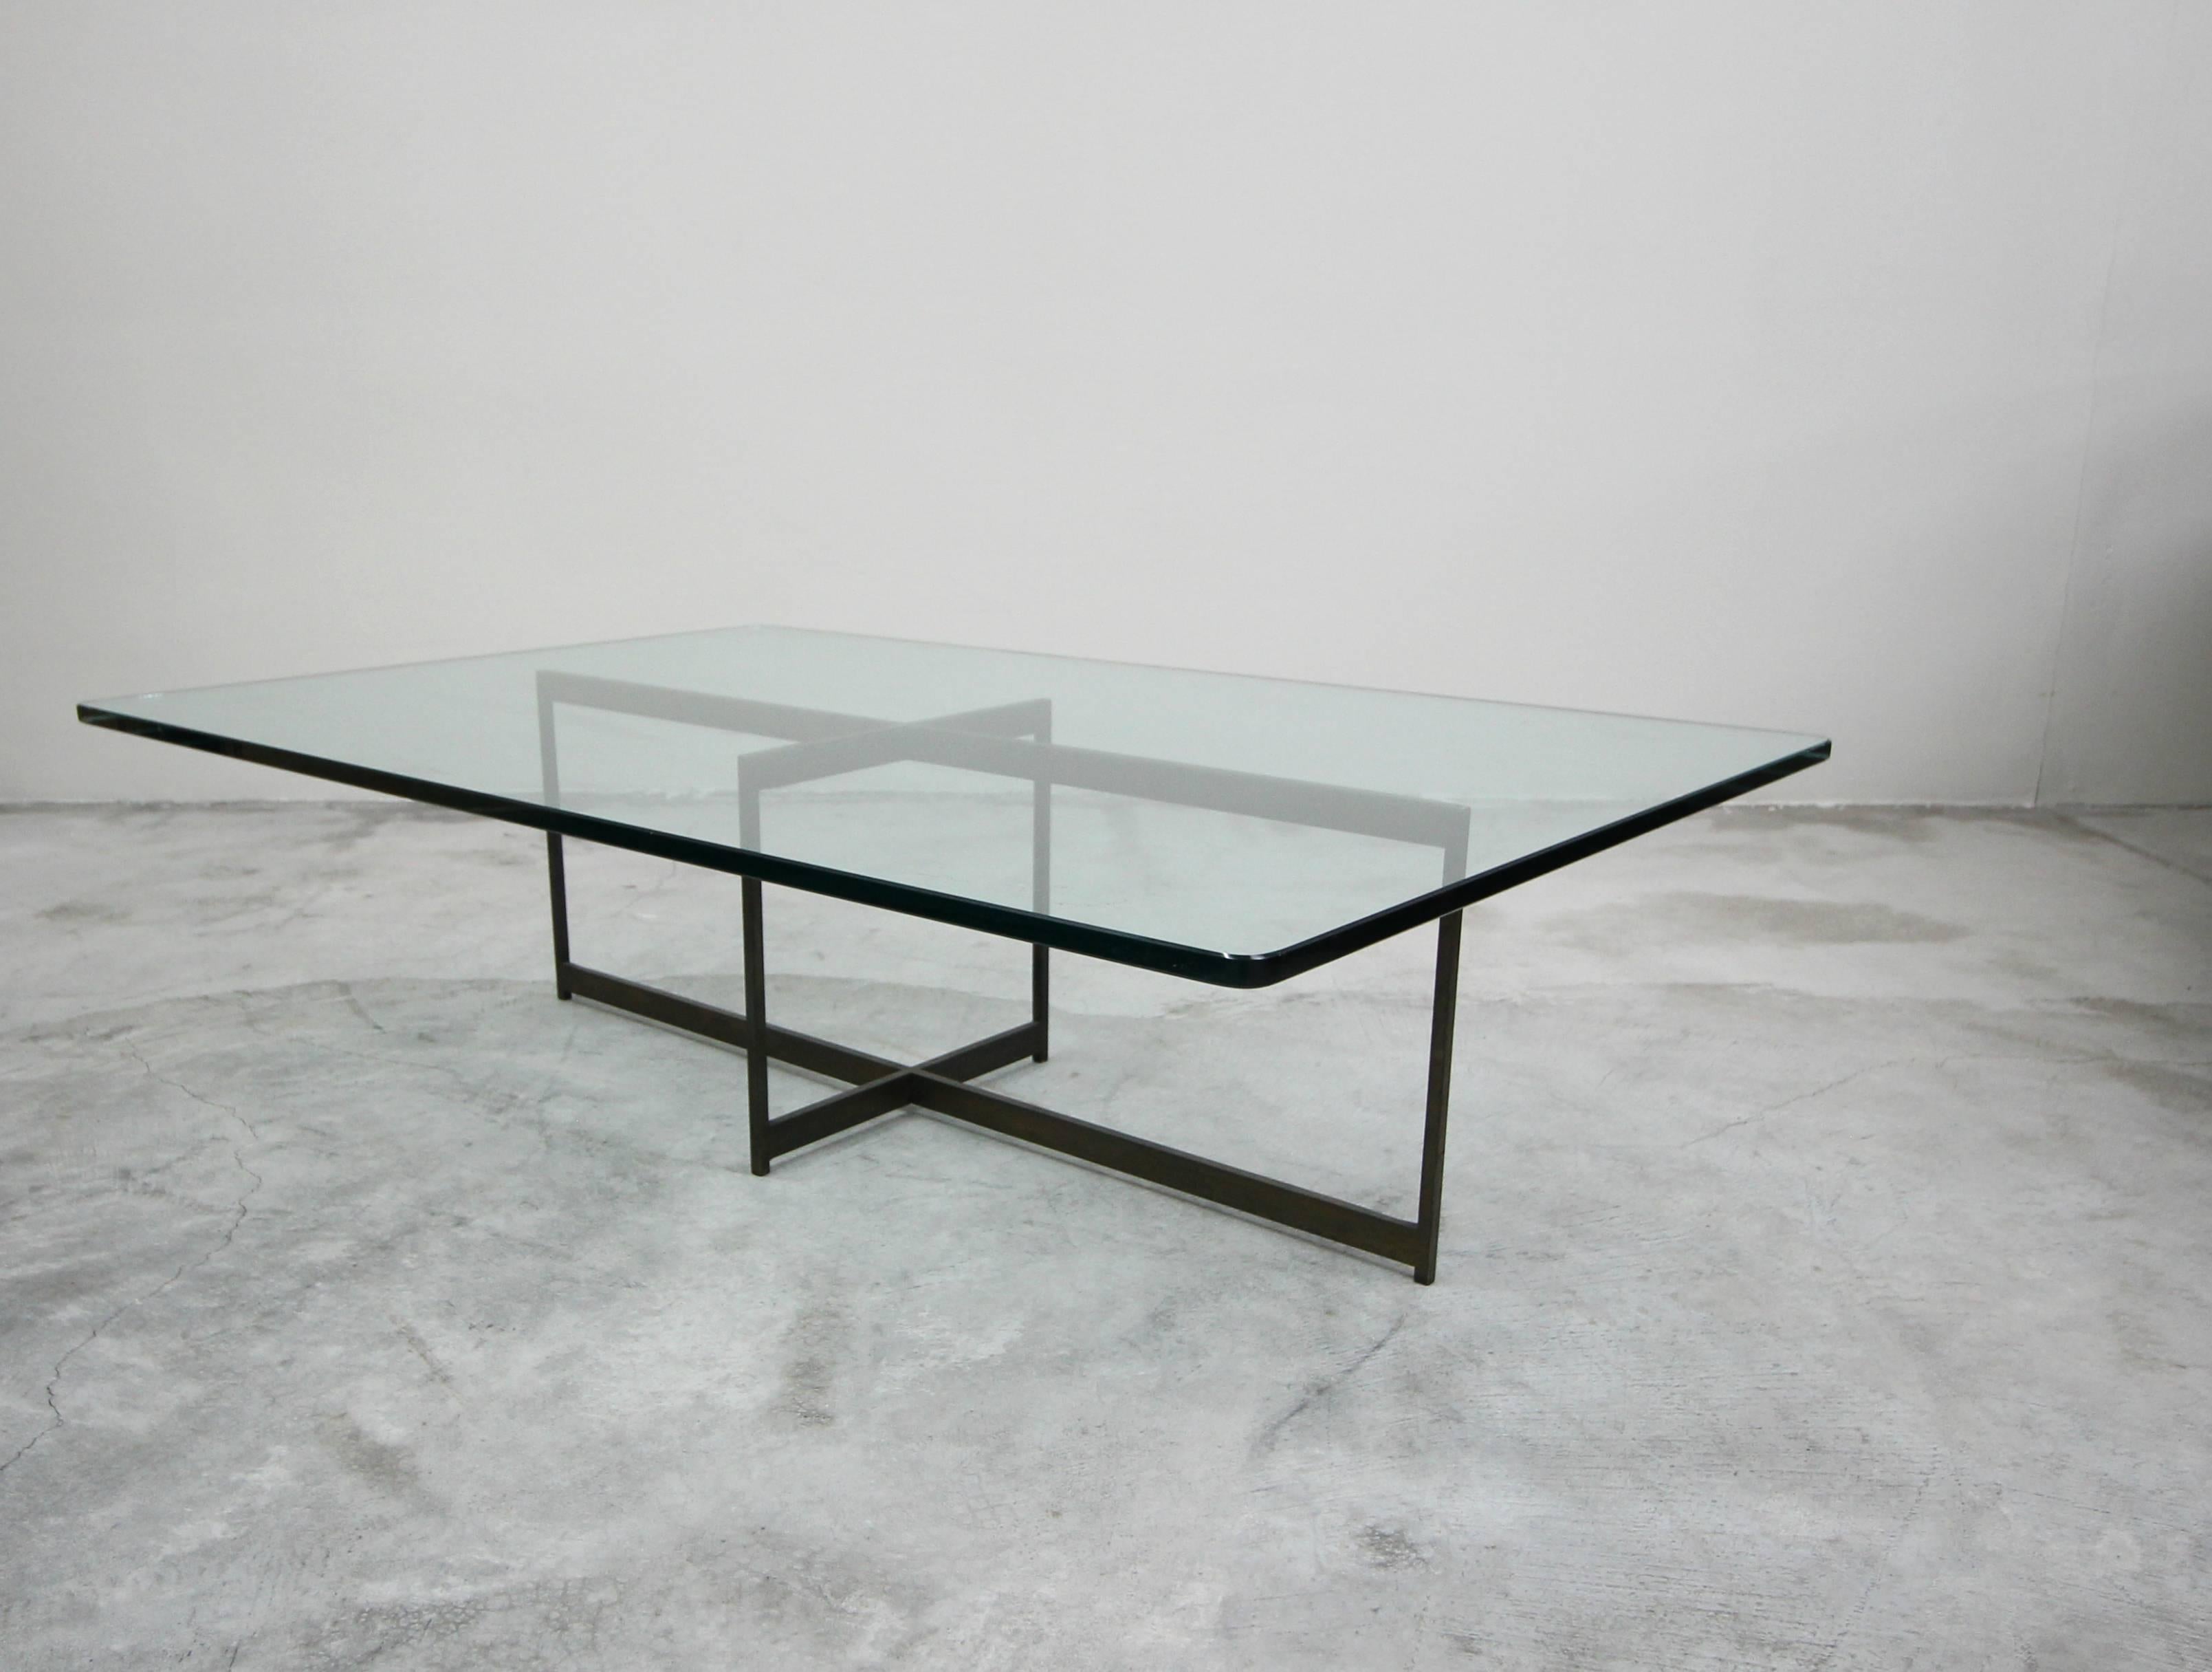 A beautiful midcentury bronze coffee table. Such a simple, yet modern and elegant piece. A minimalist bronze frame with a gorgeous piece of rectangular glass. 

Bronze has the most beautiful patina. Left as found, could be polished to bring it